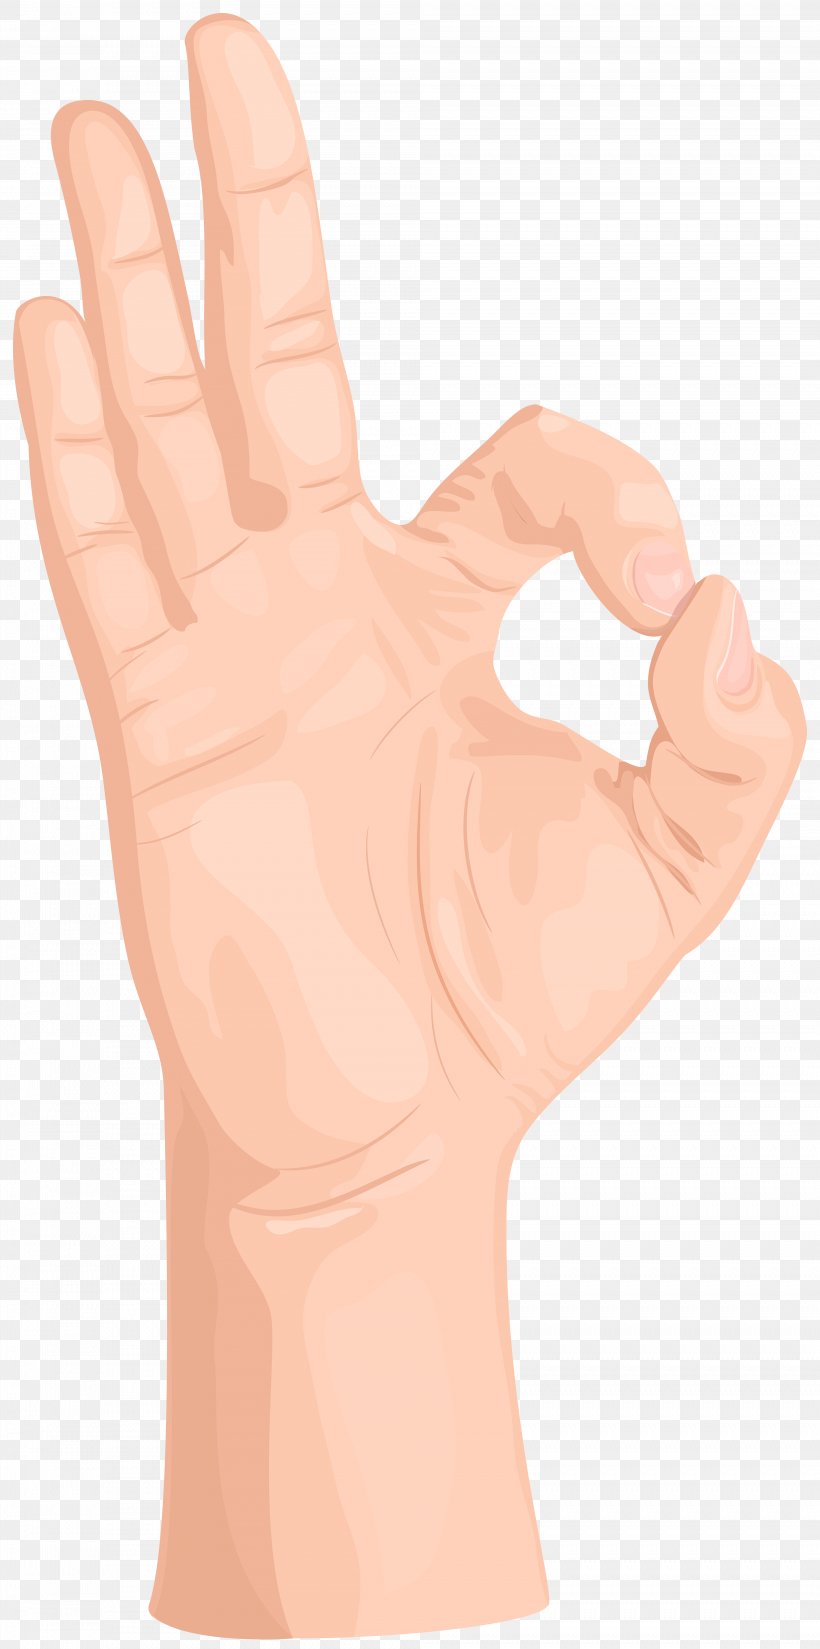 Adobe Photoshop Gesture Thumb Image, PNG, 3977x8000px, Gesture, Arm, Art, Computer Software, Finger Download Free